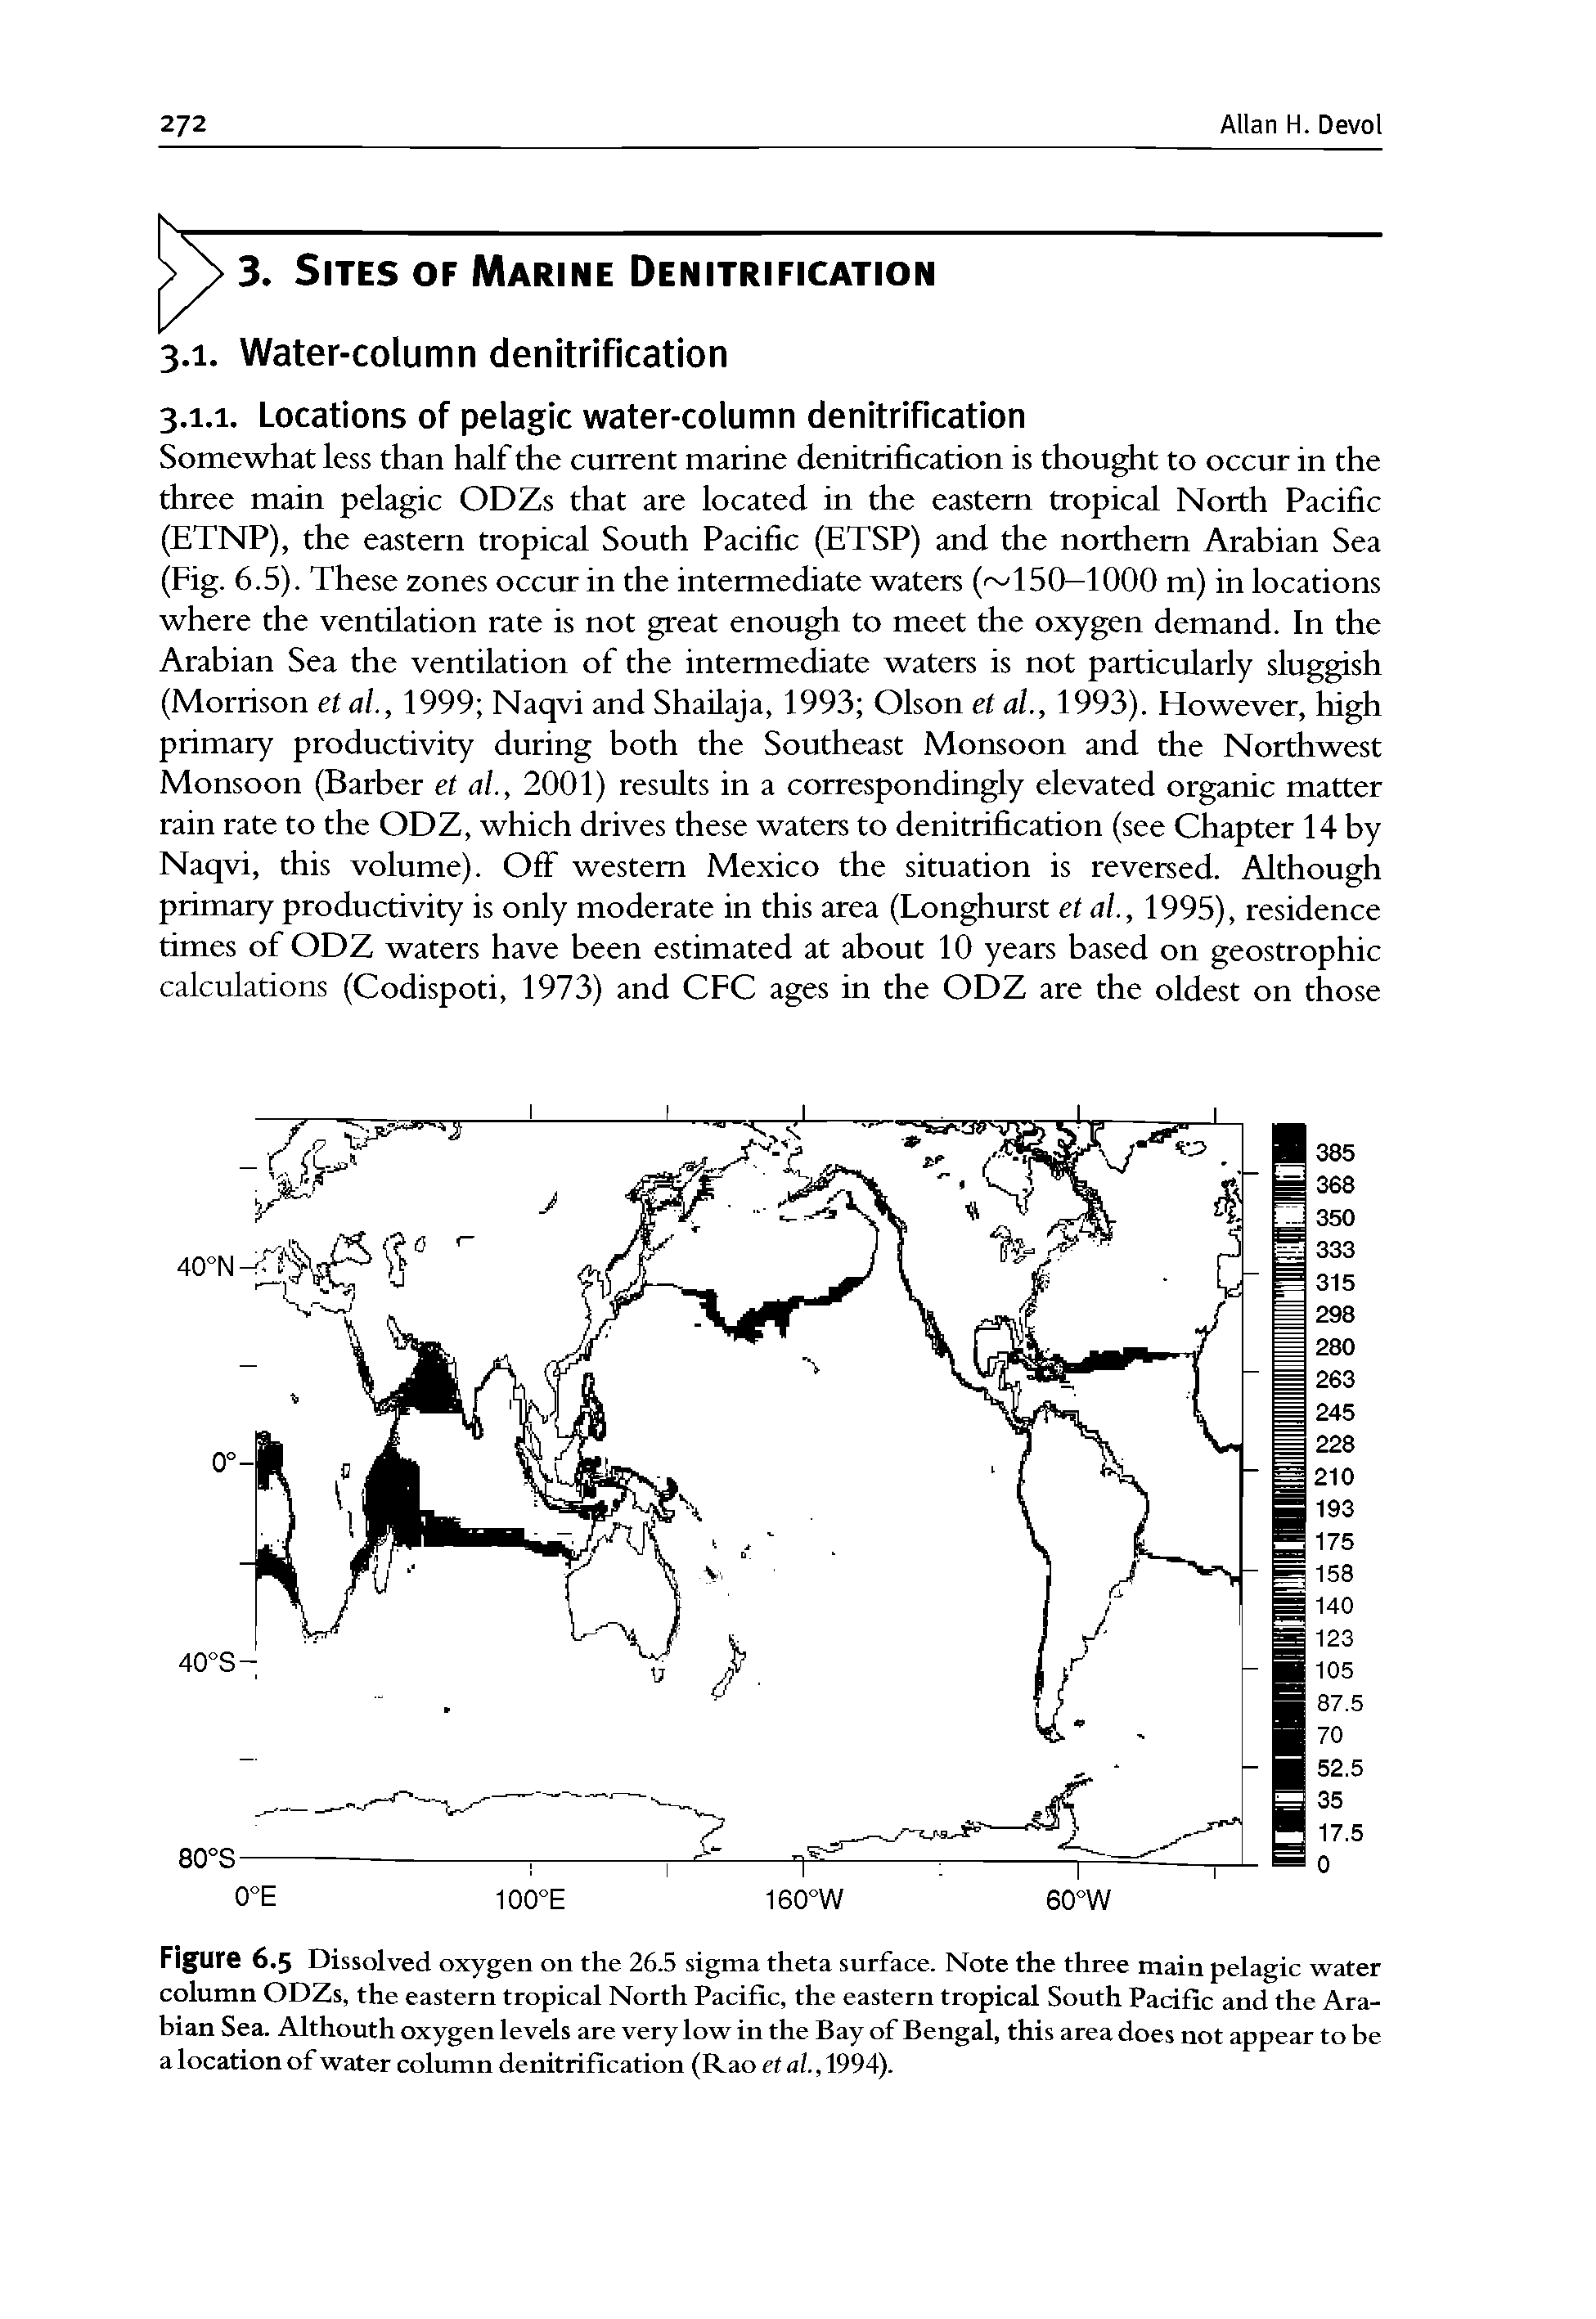 Figure 6.5 Dissolved oxygen on the 26.5 sigma theta surface. Note the three main pelagic water column ODZs, the eastern tropical North Pacific, the eastern tropical South Pacific and the Arabian Sea. Althouth oxygen levels are very low in the Bay of Bengal, this area does not appear to be a location of water column denitrification (Rao et al., 1994).